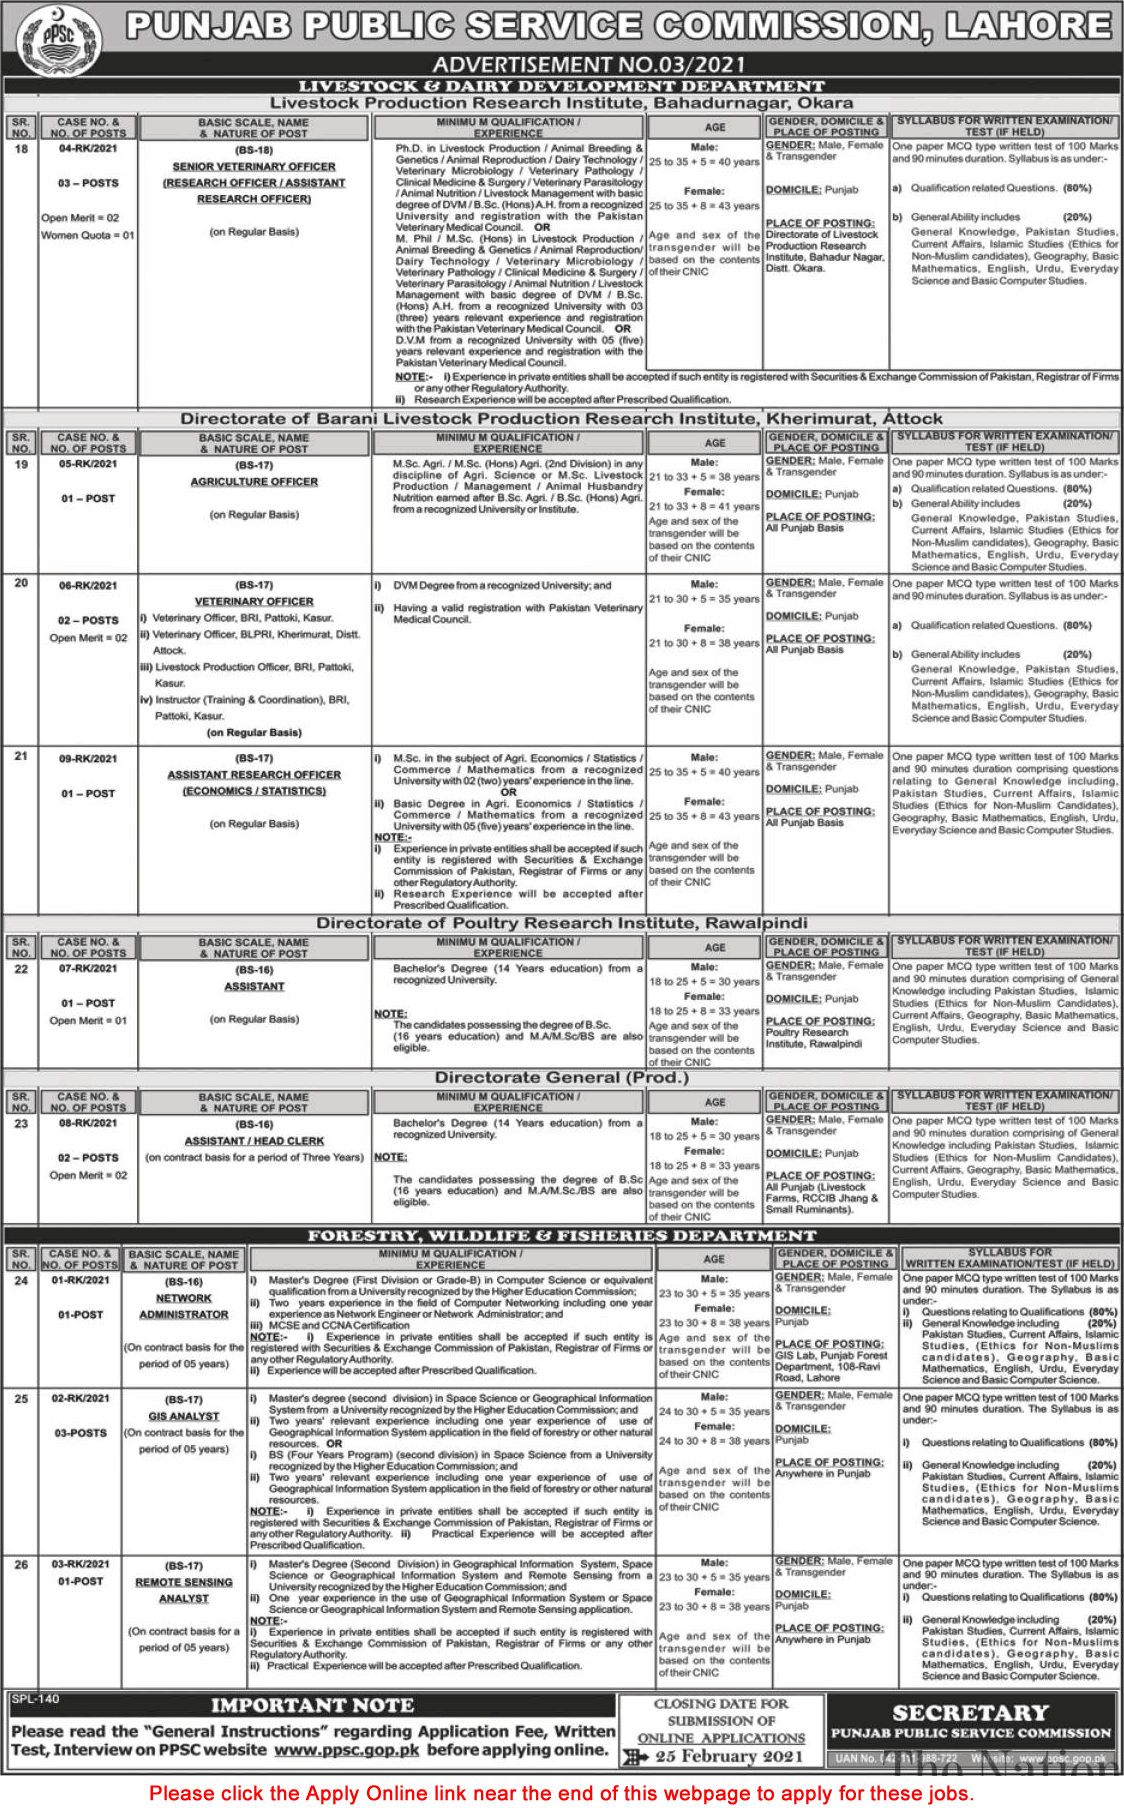 PPSC Jobs February 2021 Apply Online Consolidated Advertisement No 03/2021 3/2021 Latest